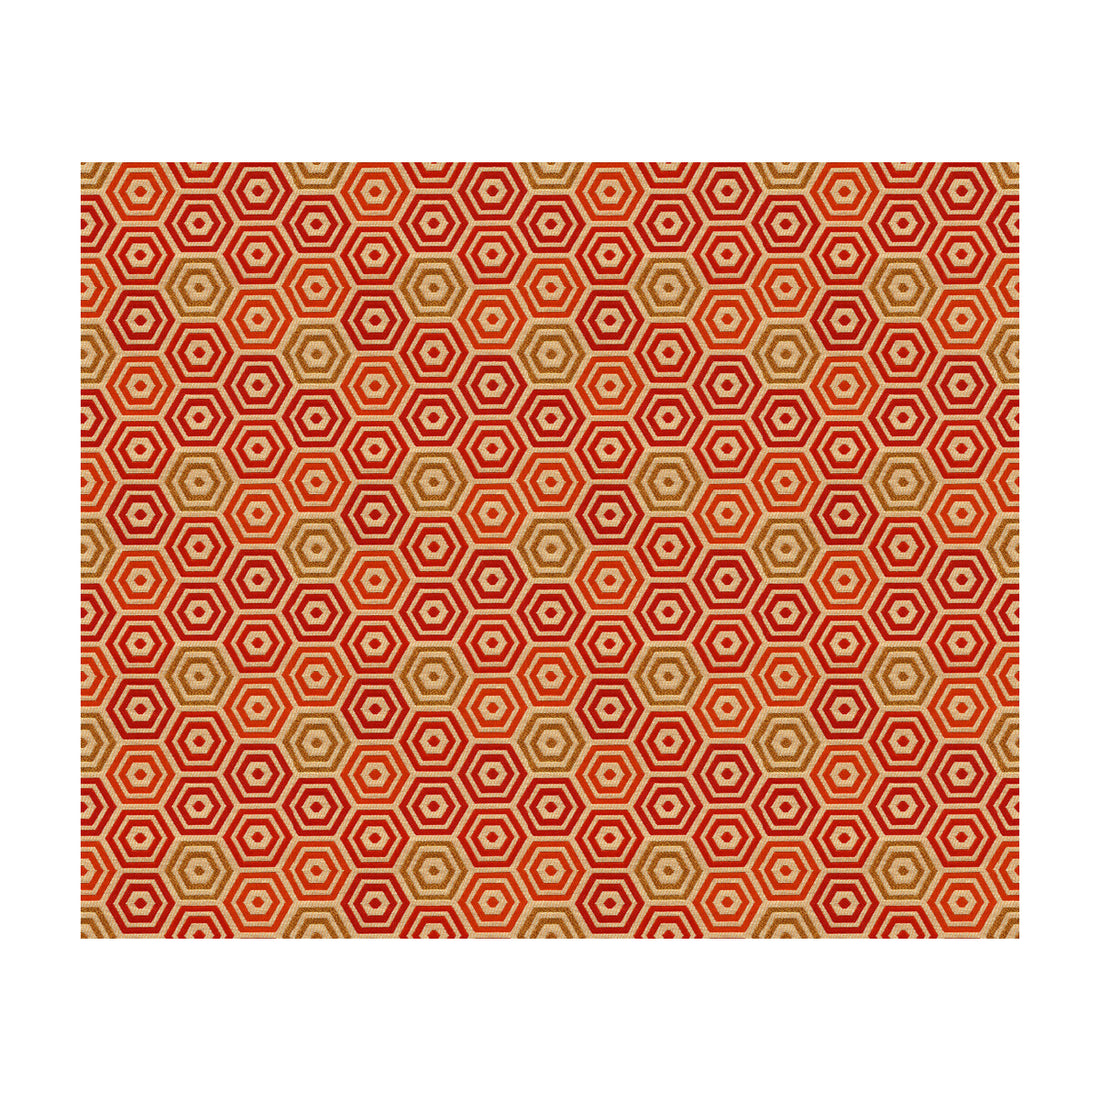 Torina fabric in persimmon color - pattern 33638.419.0 - by Kravet Contract in the Jonathan Adler Clarity collection